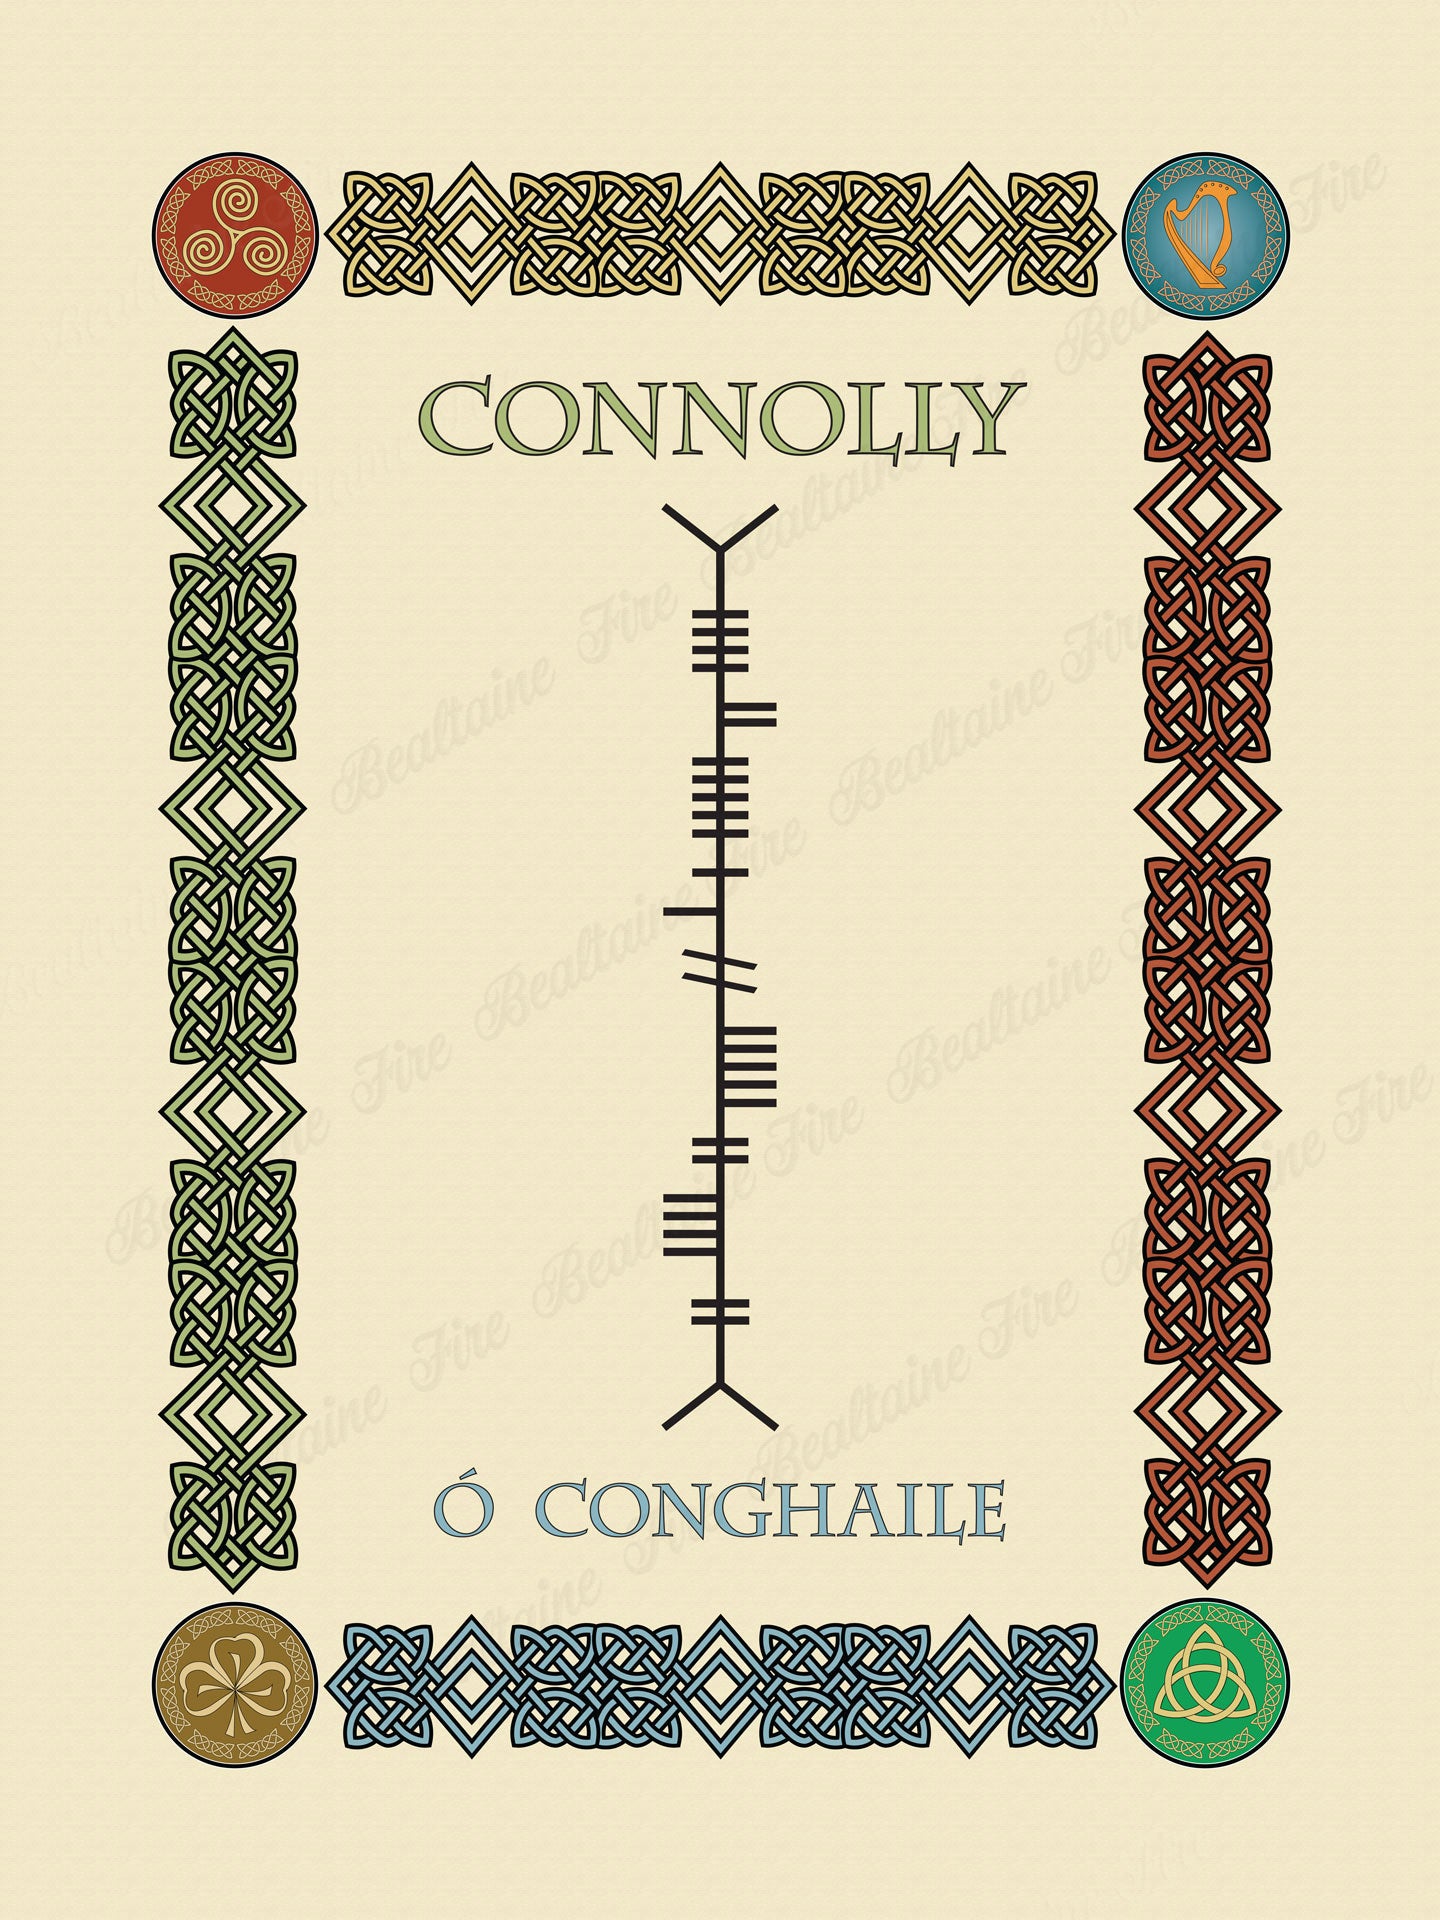 Connolly in Old Irish and Ogham - PDF Download